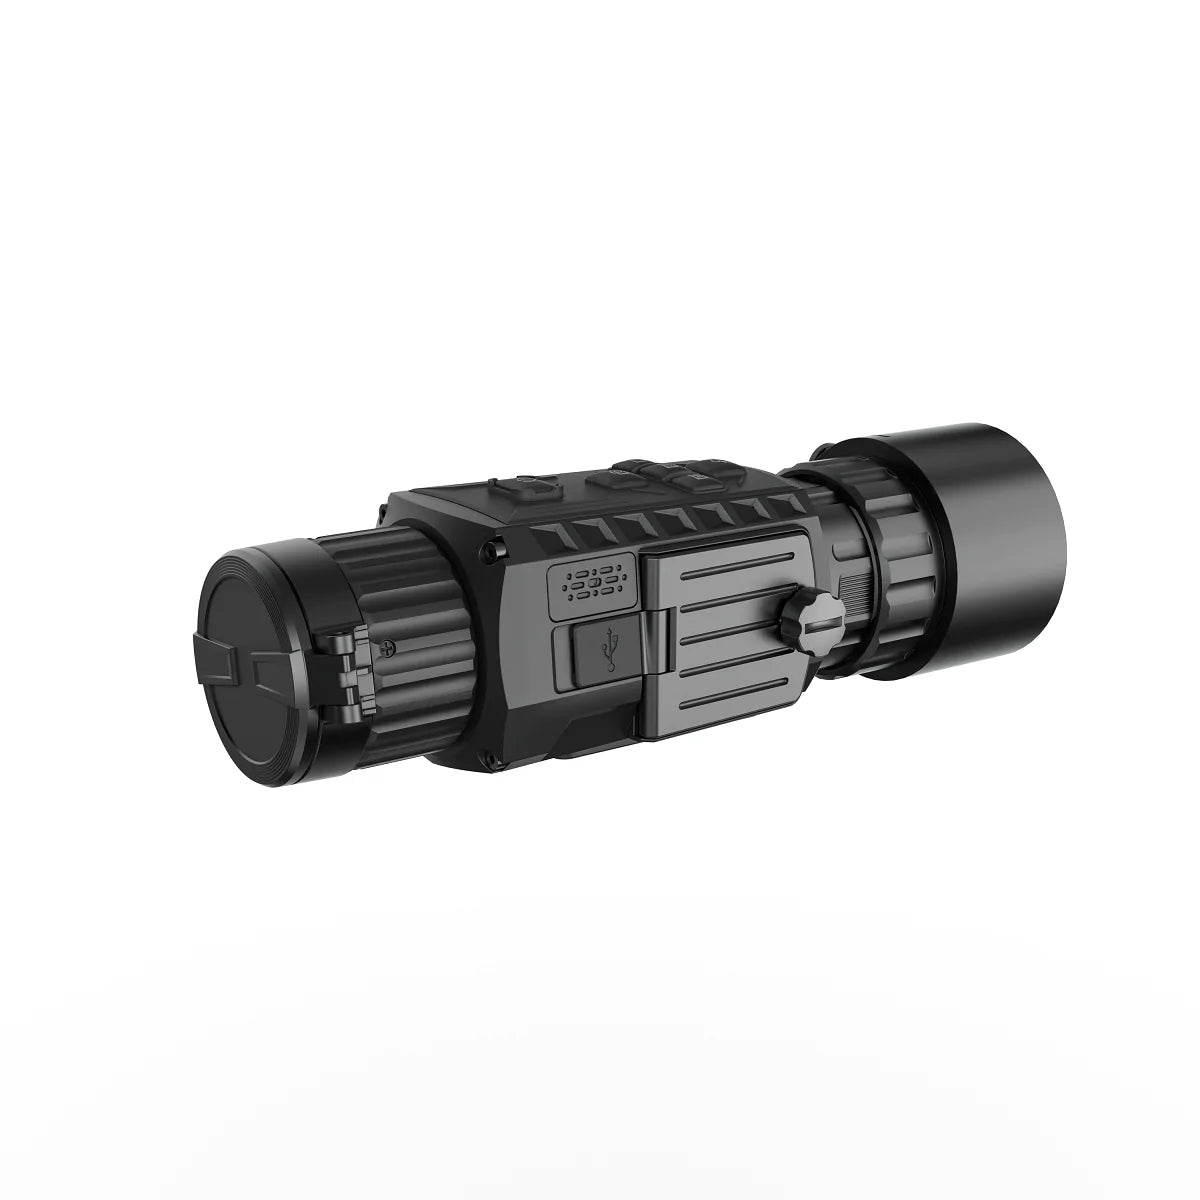 VECTOR OPTICS CO35 1X35MM THERMAL IMAGE SCOPE 3-IN-1: RIFLESCOPE/MONOCULAR+CLIP ON